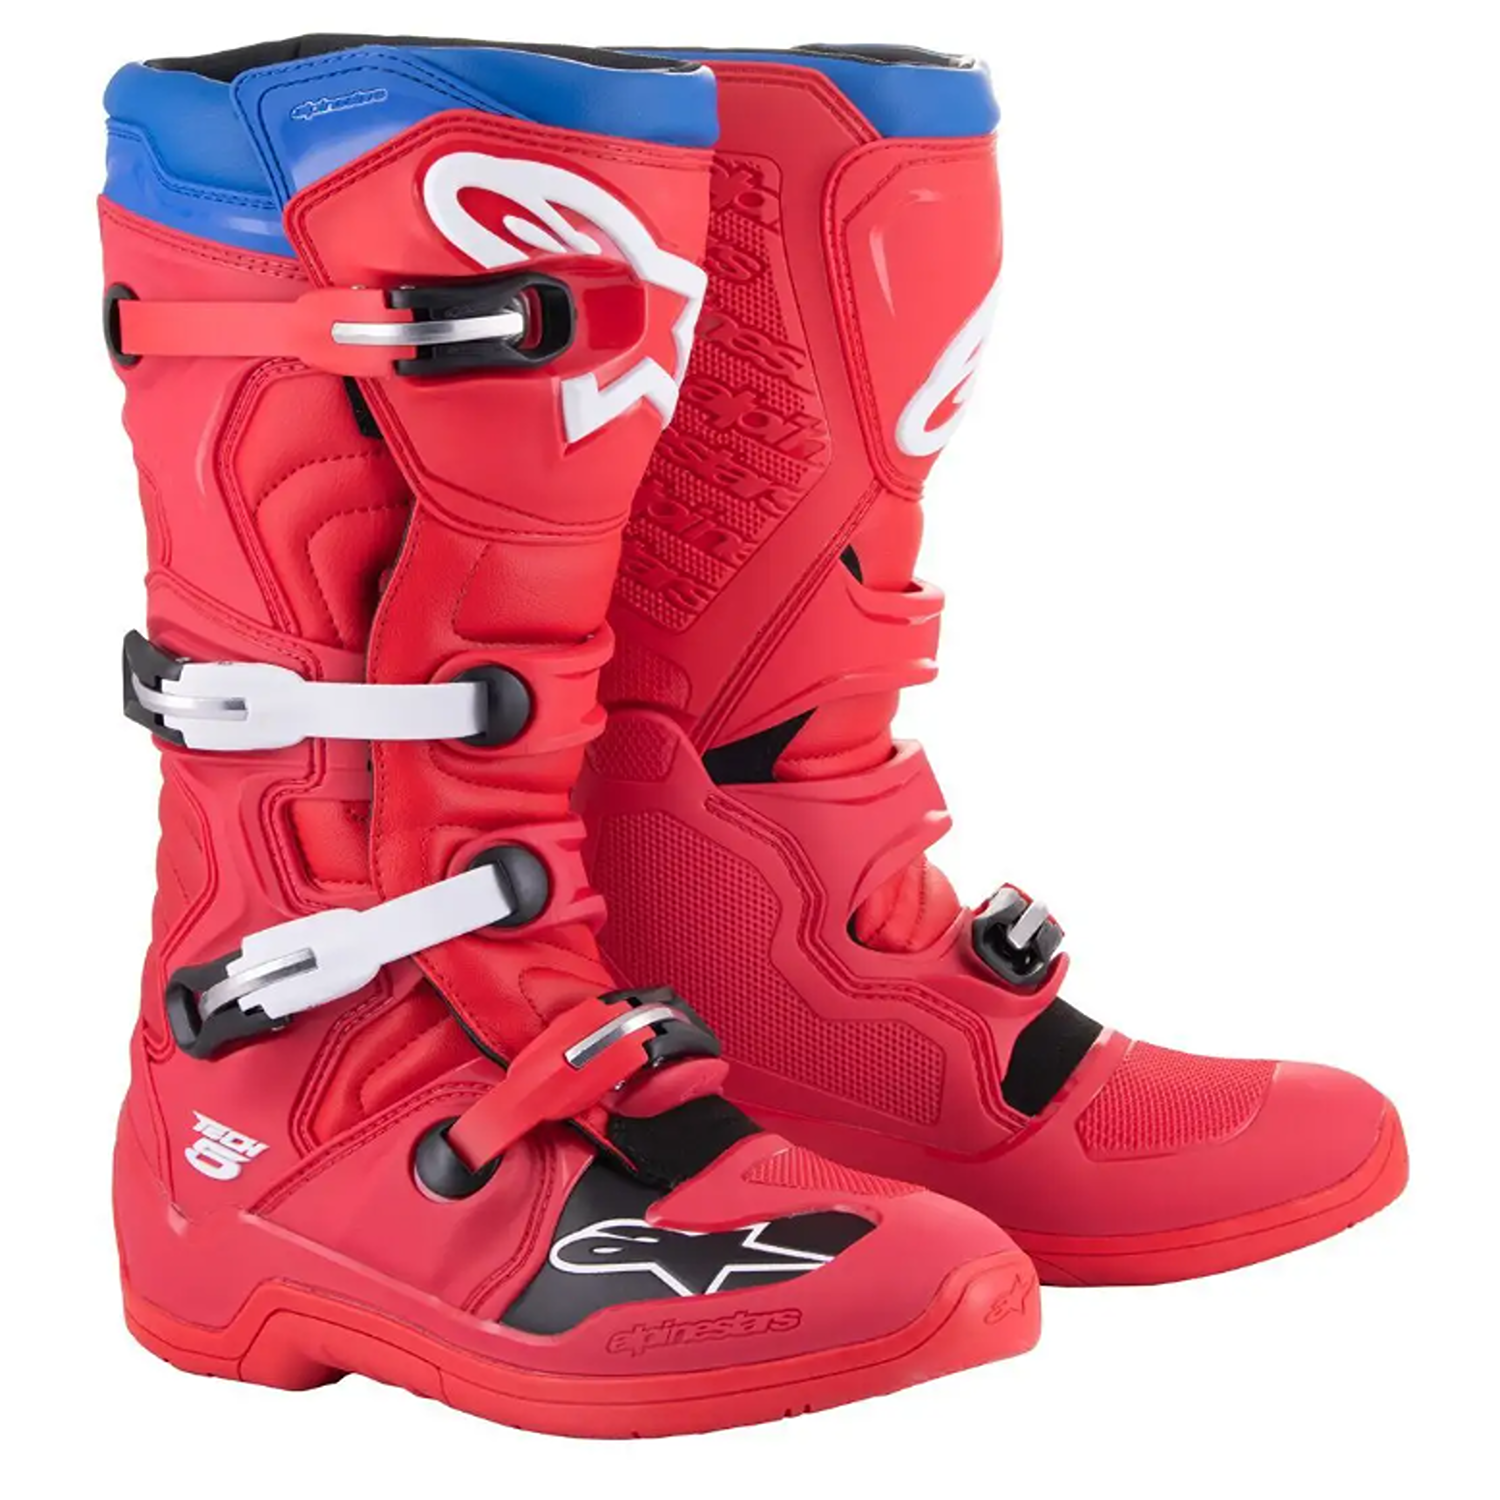 Image of Alpinestars Tech 5 Boots Bright Red Dark Red Blue Taille US 9